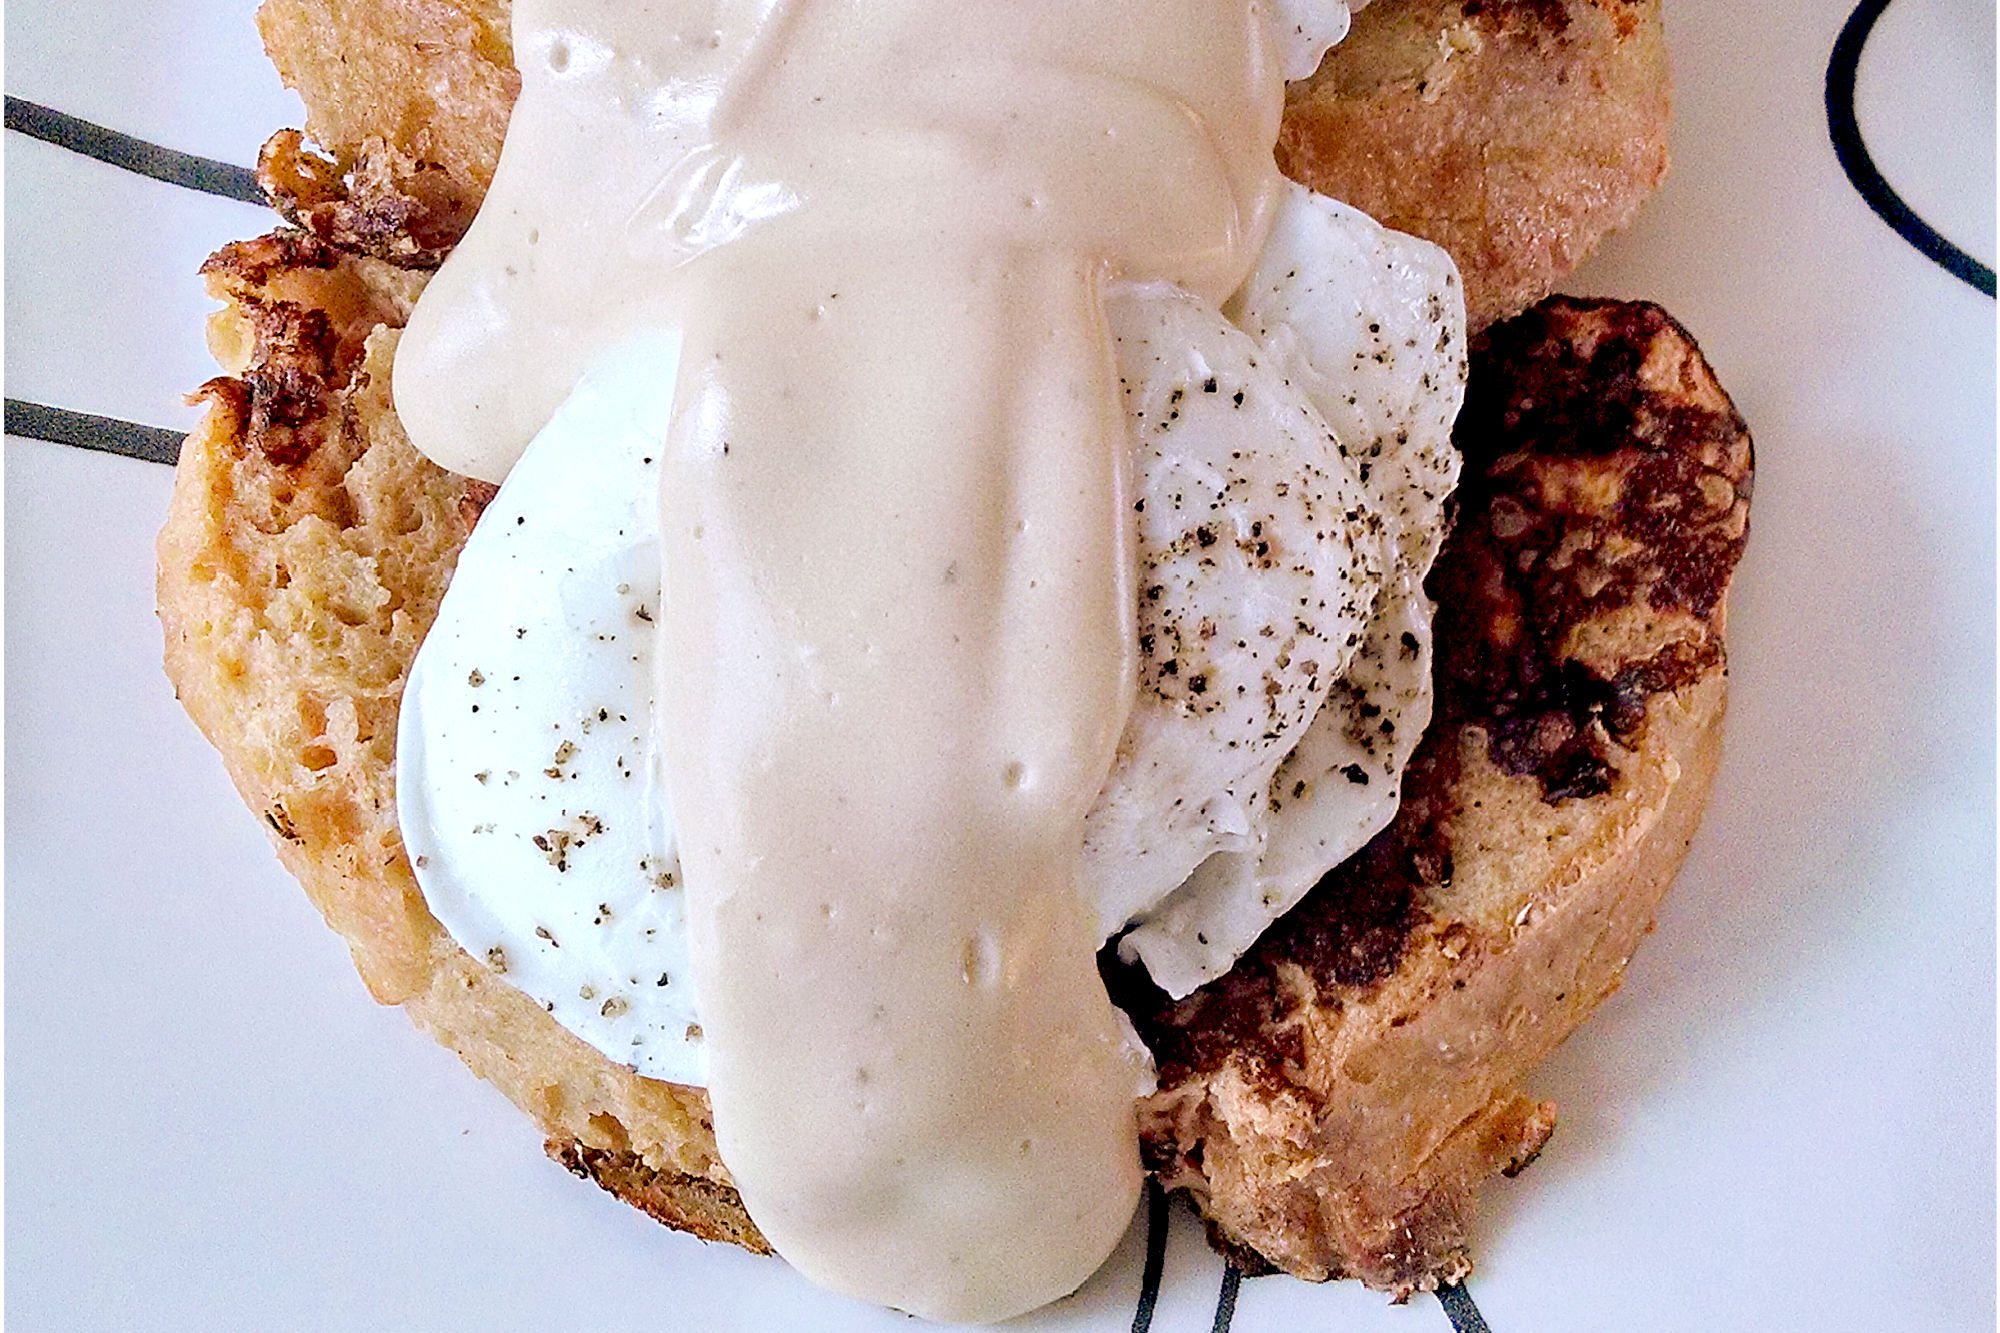 Savory French toast is not only different, but is amazingly tasty! This Tomato Parmesan Pain Perdu with Poached Eggs and Rarebit Sauce is hearty enough for any meat eater.